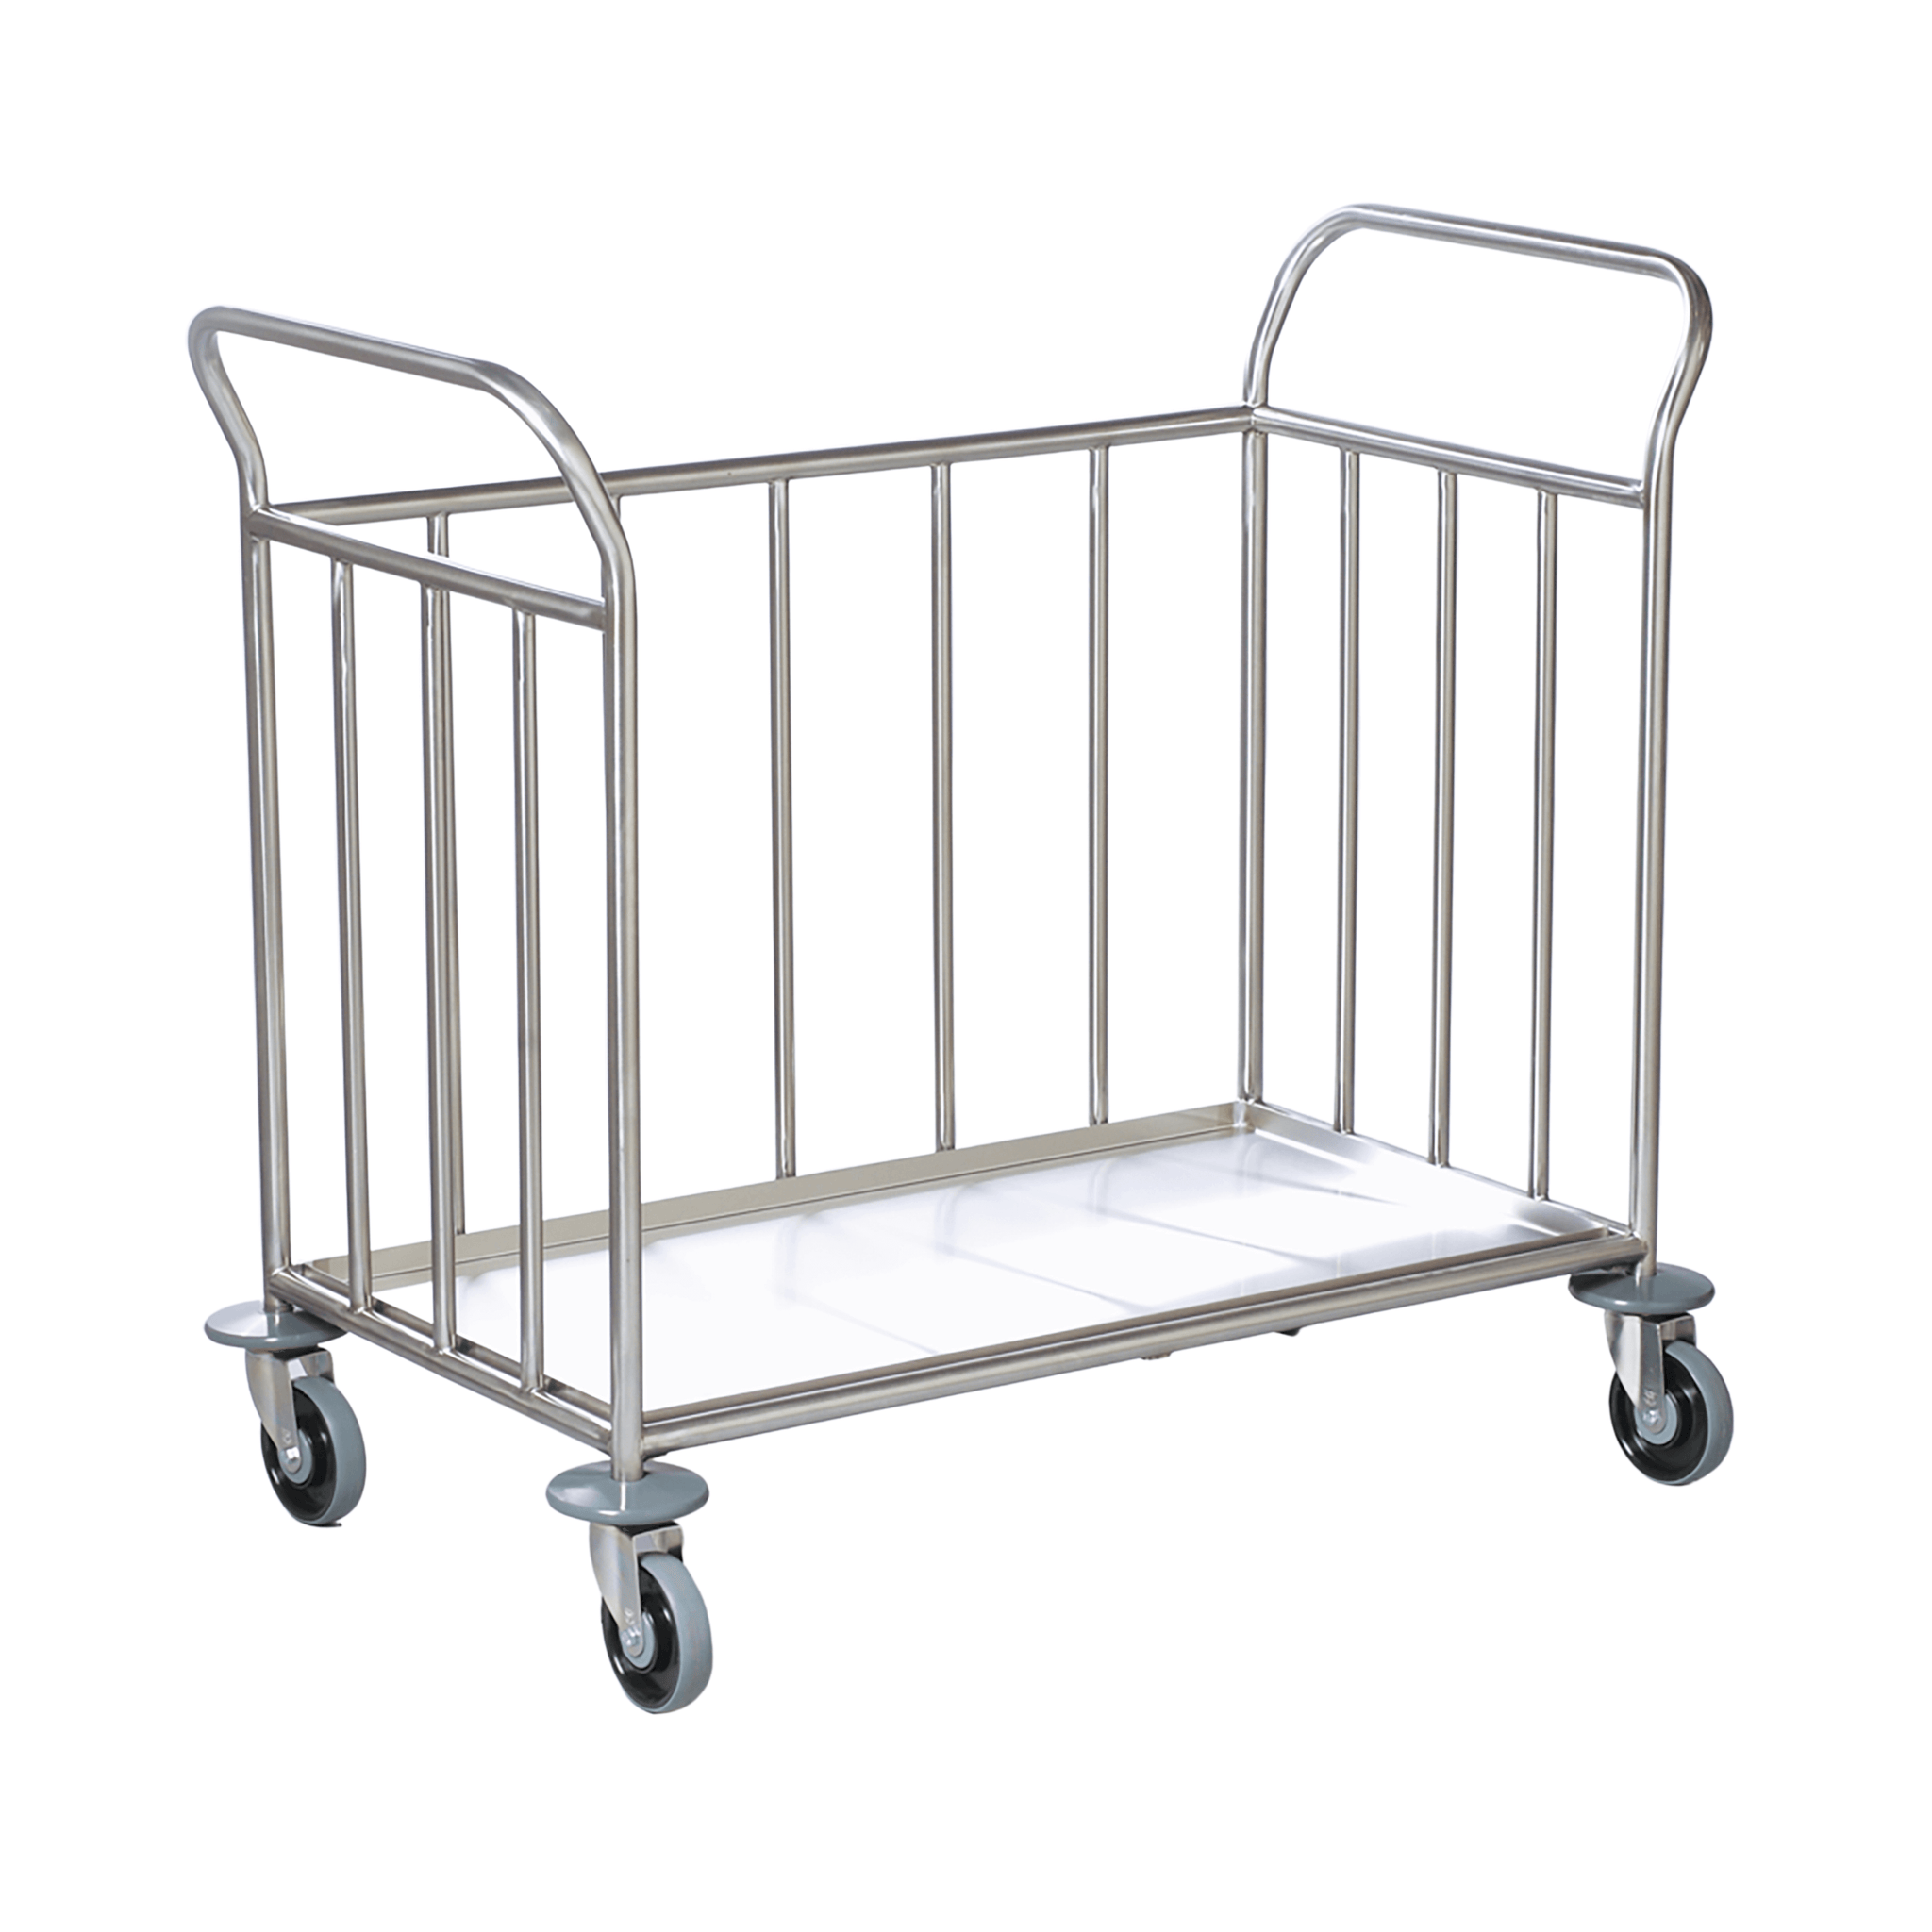 Bulk Collection Trolley - Stainless Steel